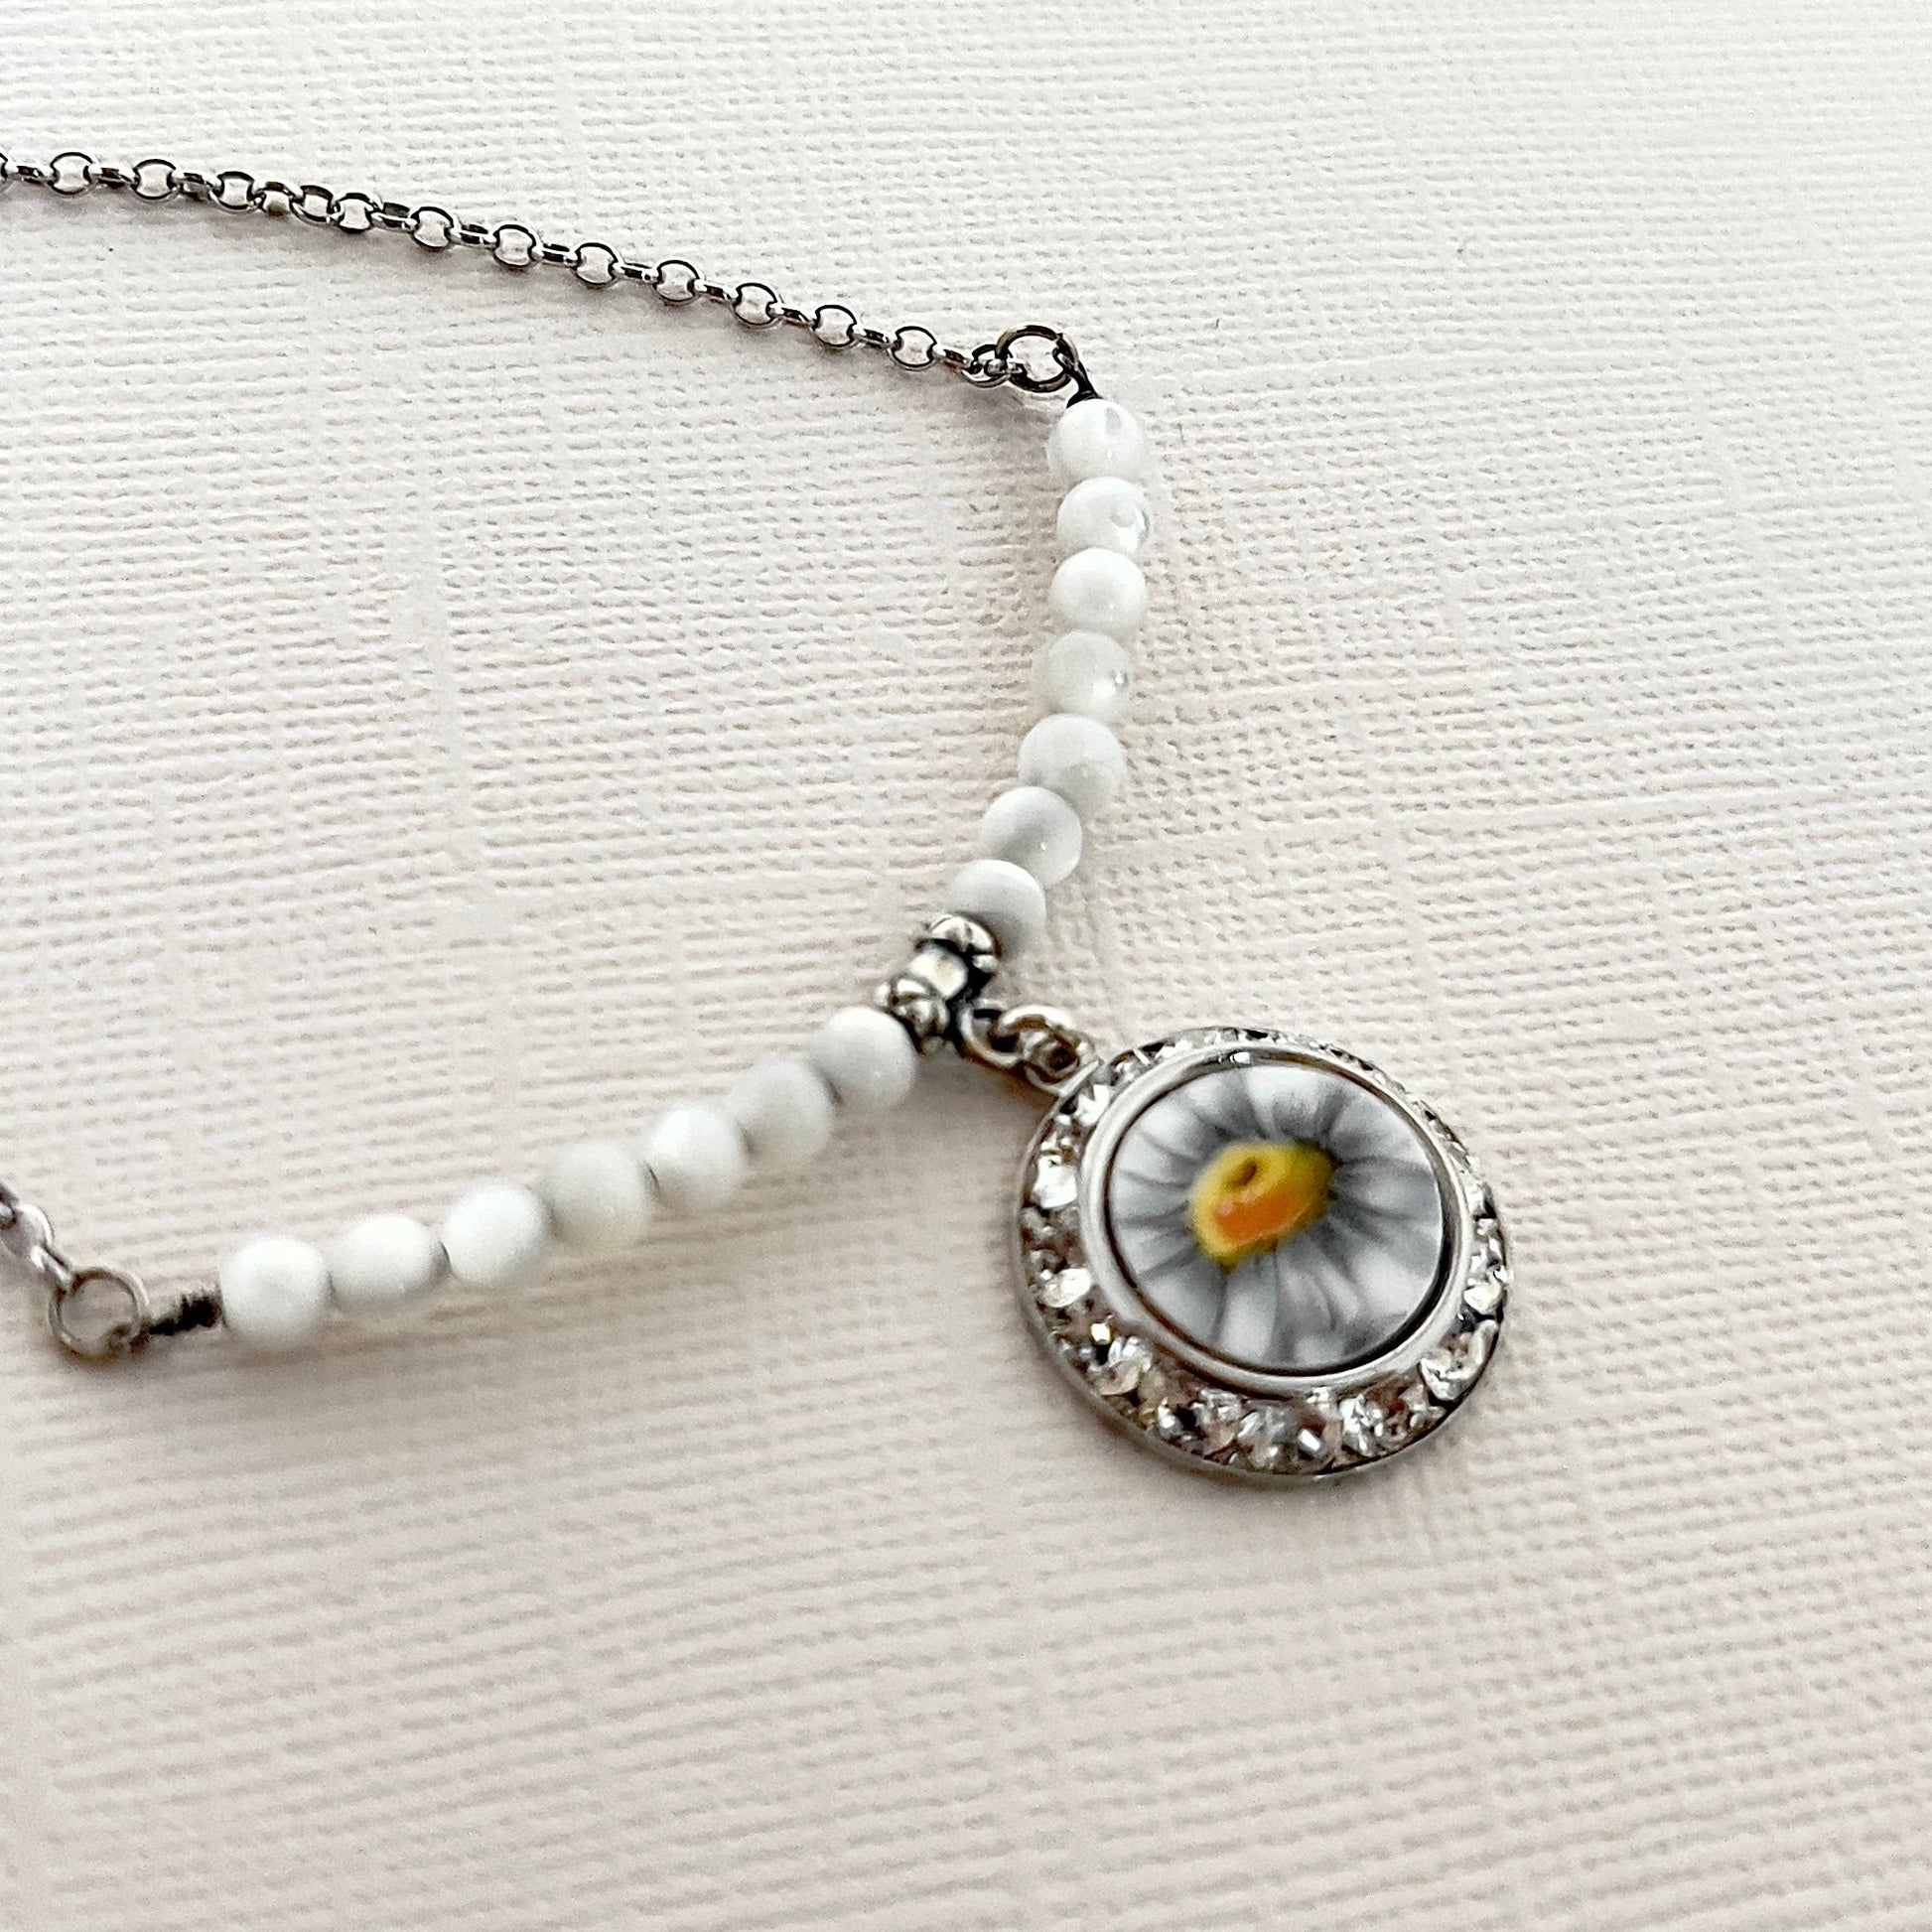 Crystal Daisy Necklace, White Mother of Pearl Summer Necklace, Broken China Jewelry